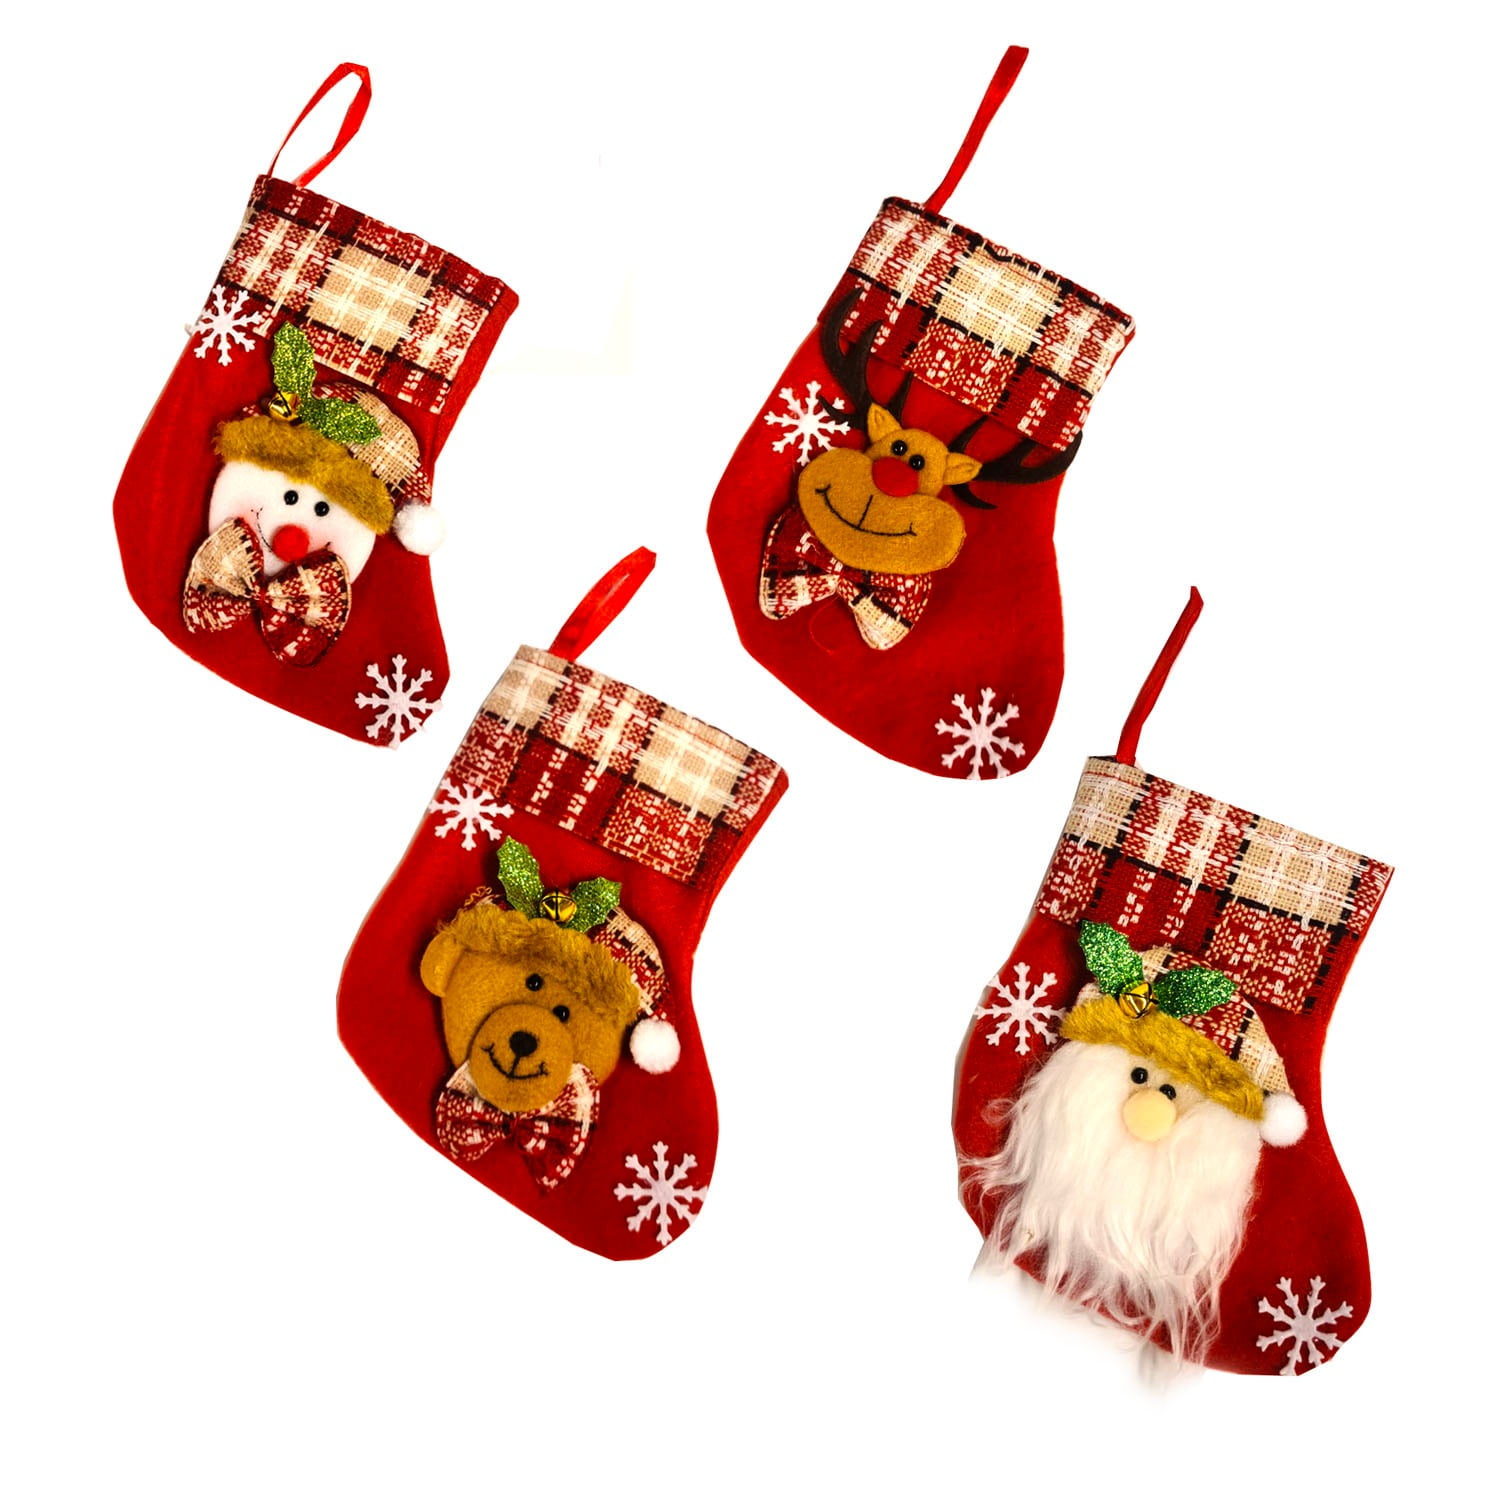 Christmas Santa Claus Wine Bottle Cover Holder Candy Bag Cover Stocking Xmas 